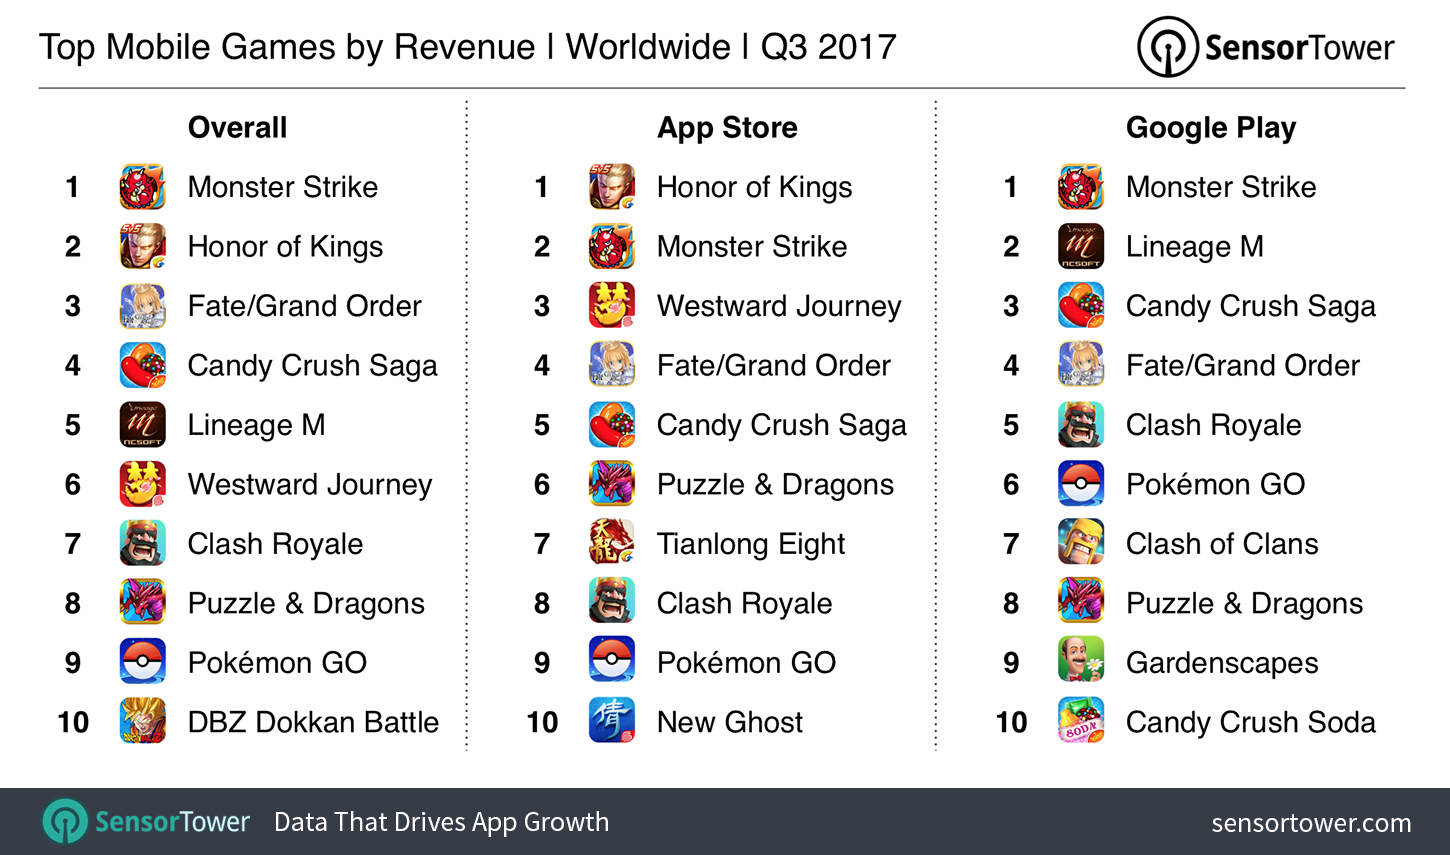 Q3 2017's Top Mobile Games by Revenue